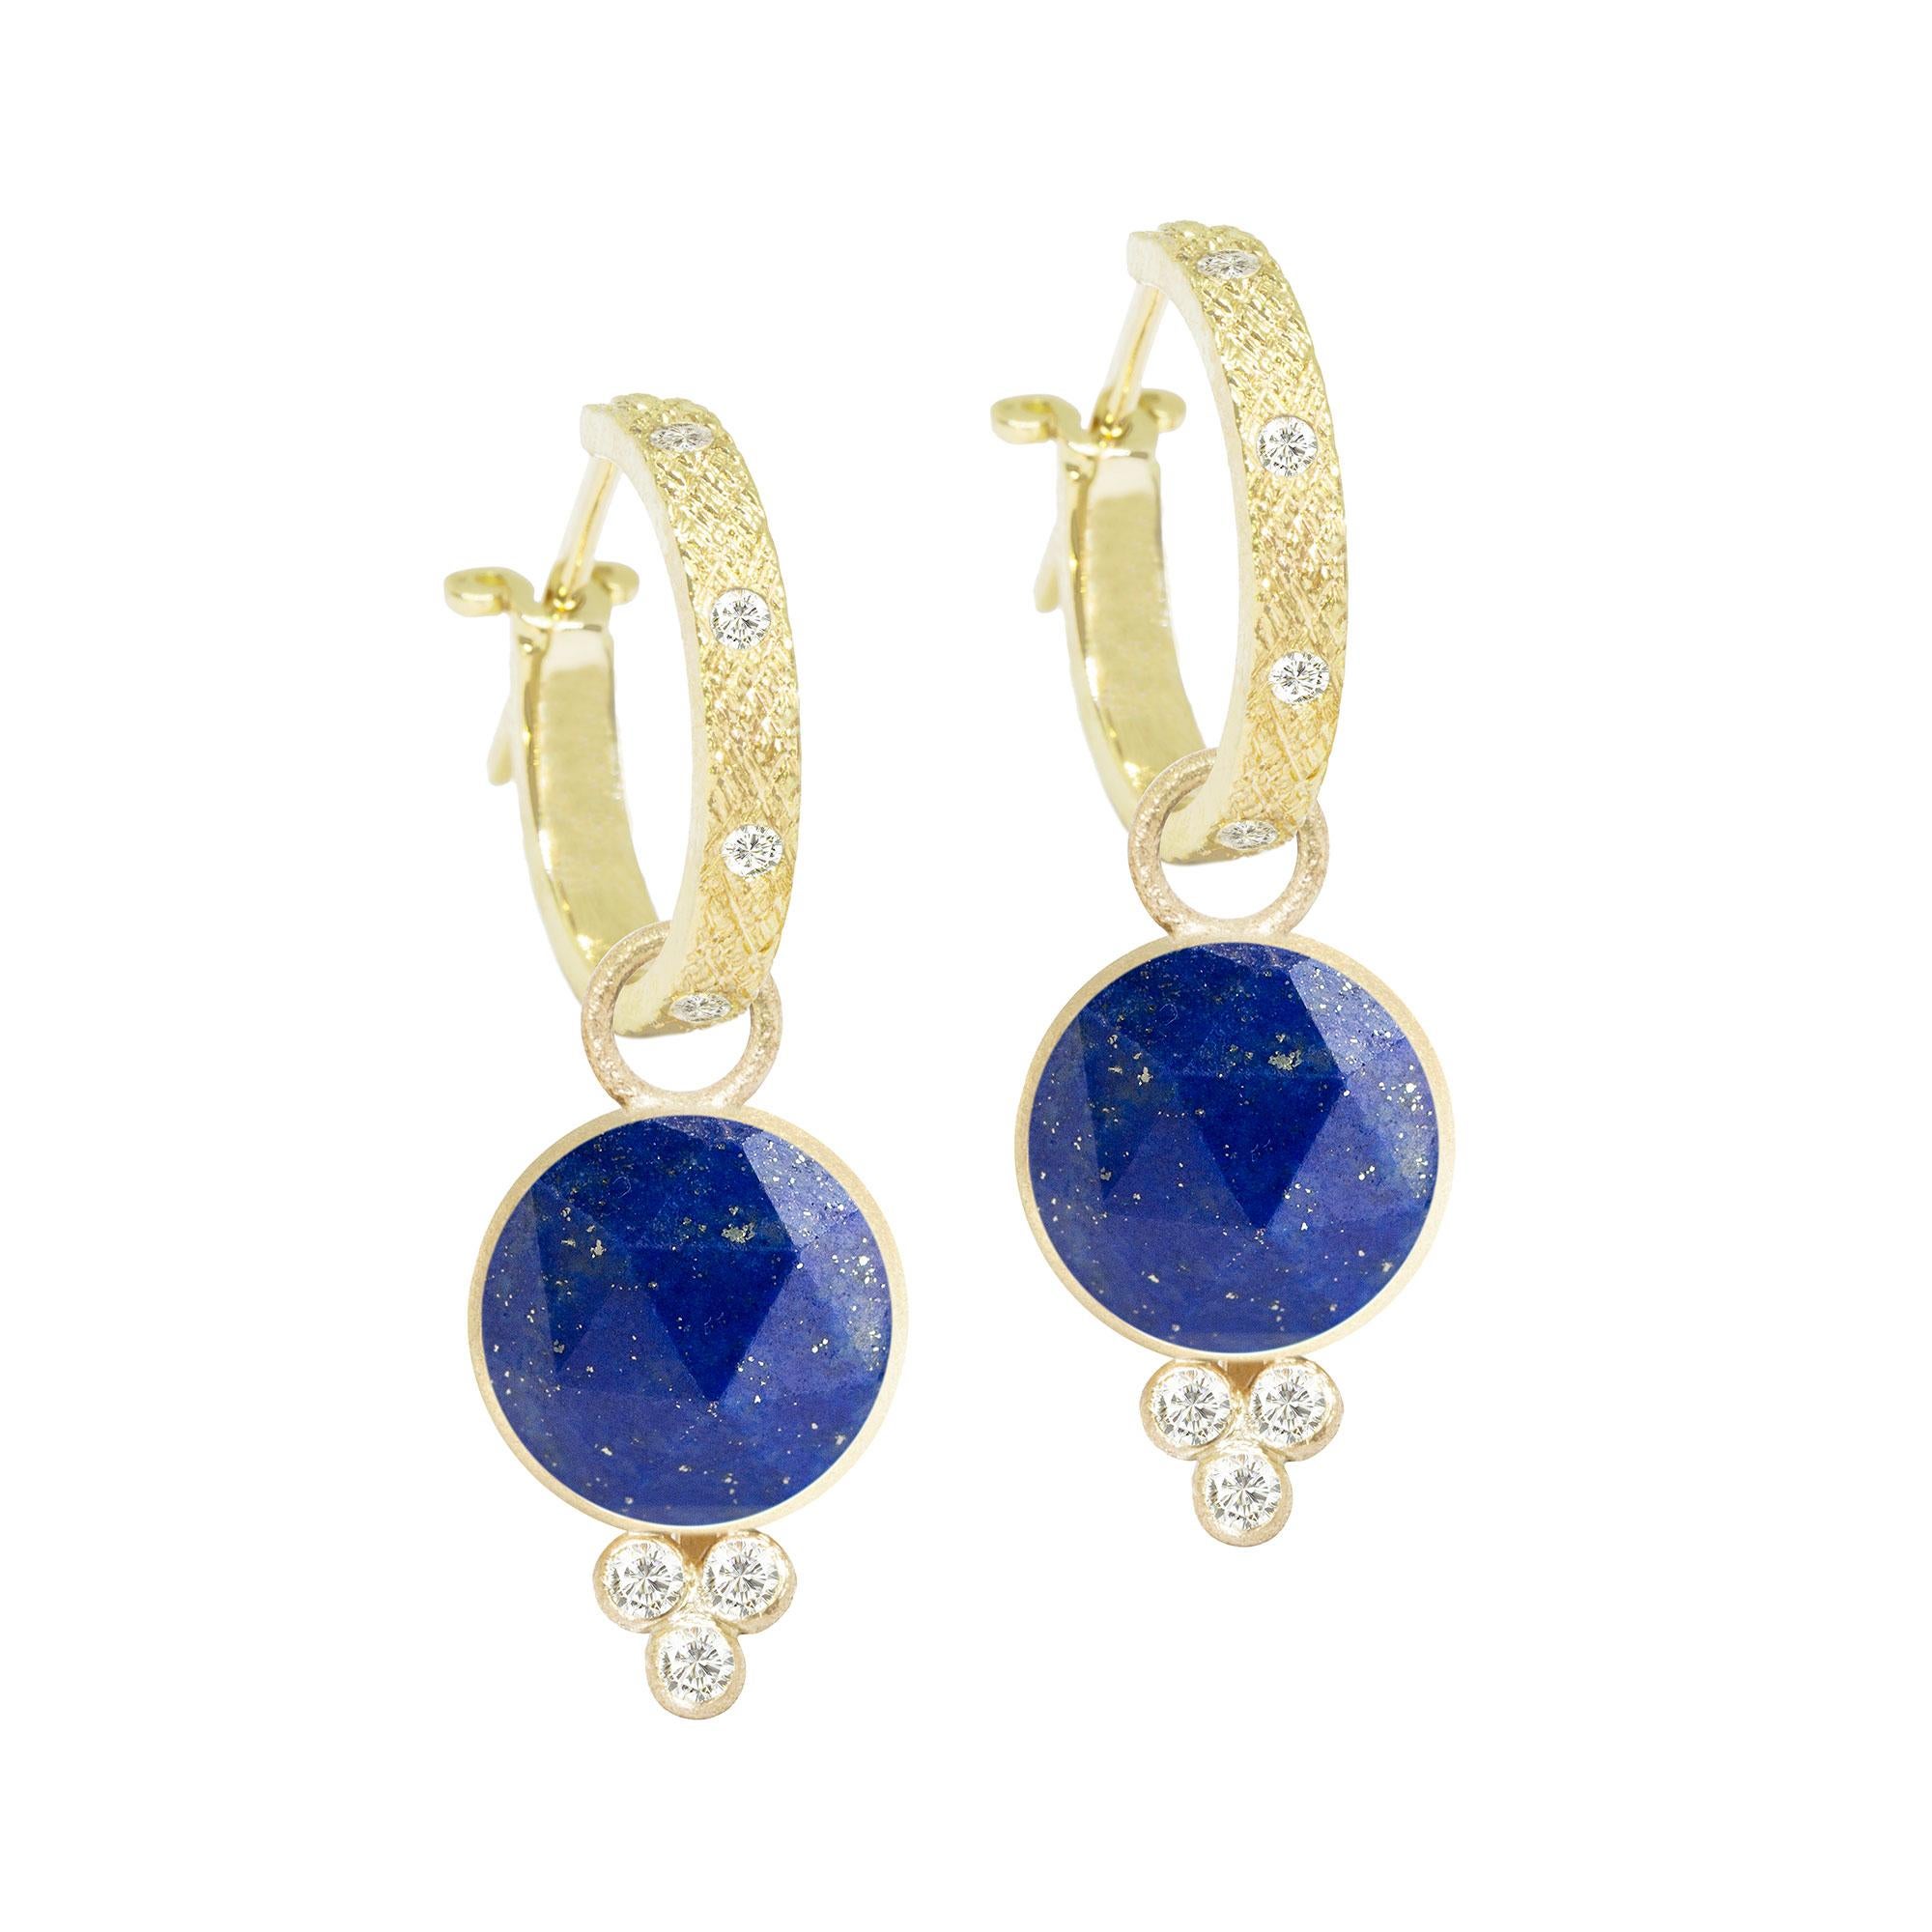 A Nina Nguyen classic to collect and treasure: Our diamond-accented Chloe Gold Charms are designed with lapis rimmed in gold. They pair with any of our hoops and mix well with other styles.
Nina Nguyen Design's patent-pending earrings have an